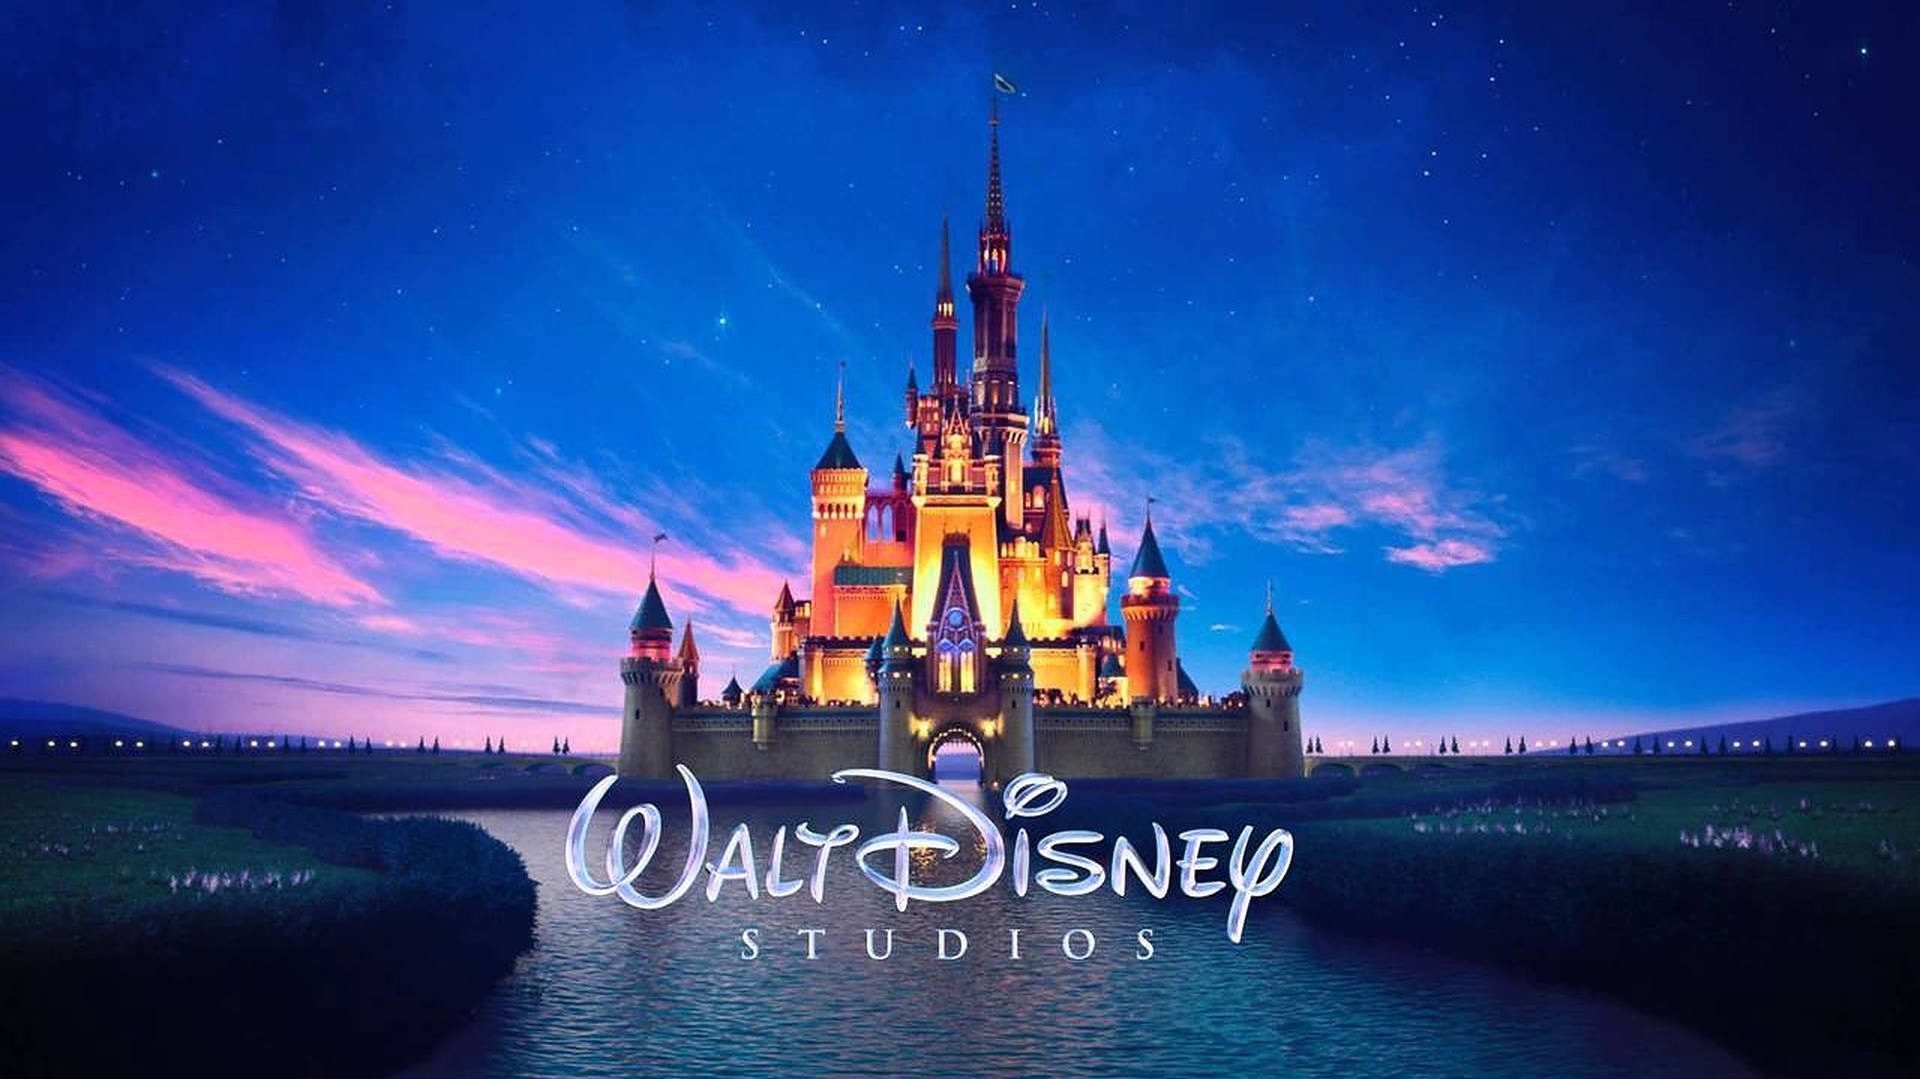 503 Disney Wallpapers & Backgrounds For